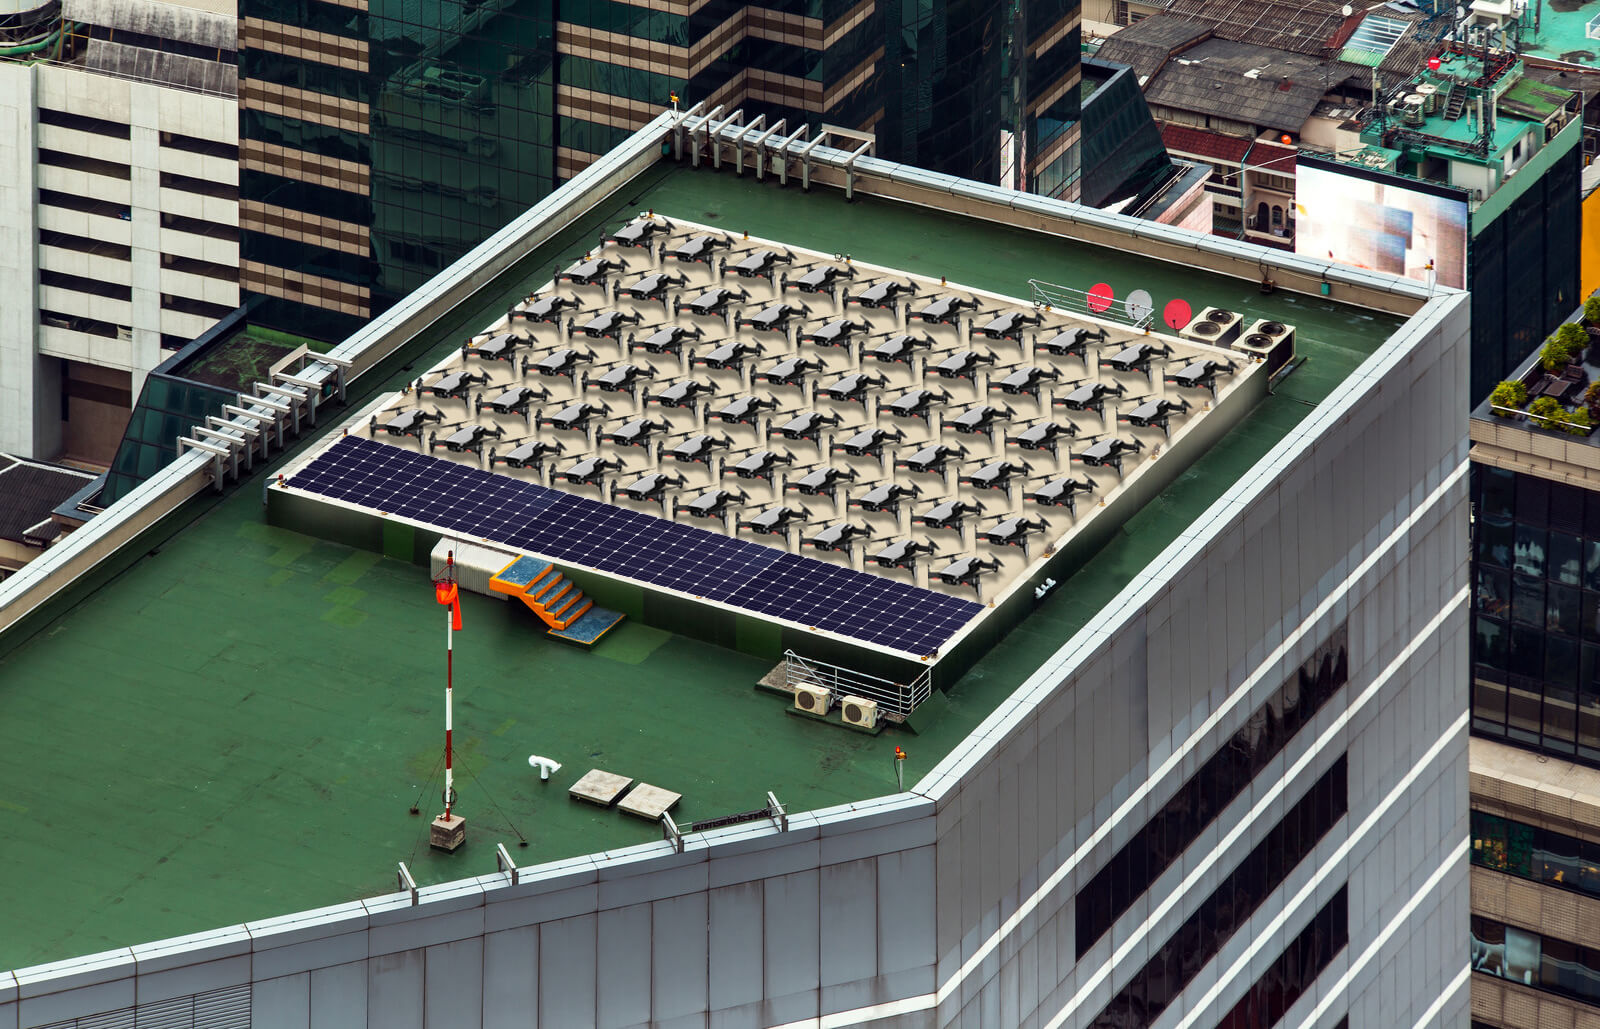 Mockup of a wireless drone charging station on a rooftop.